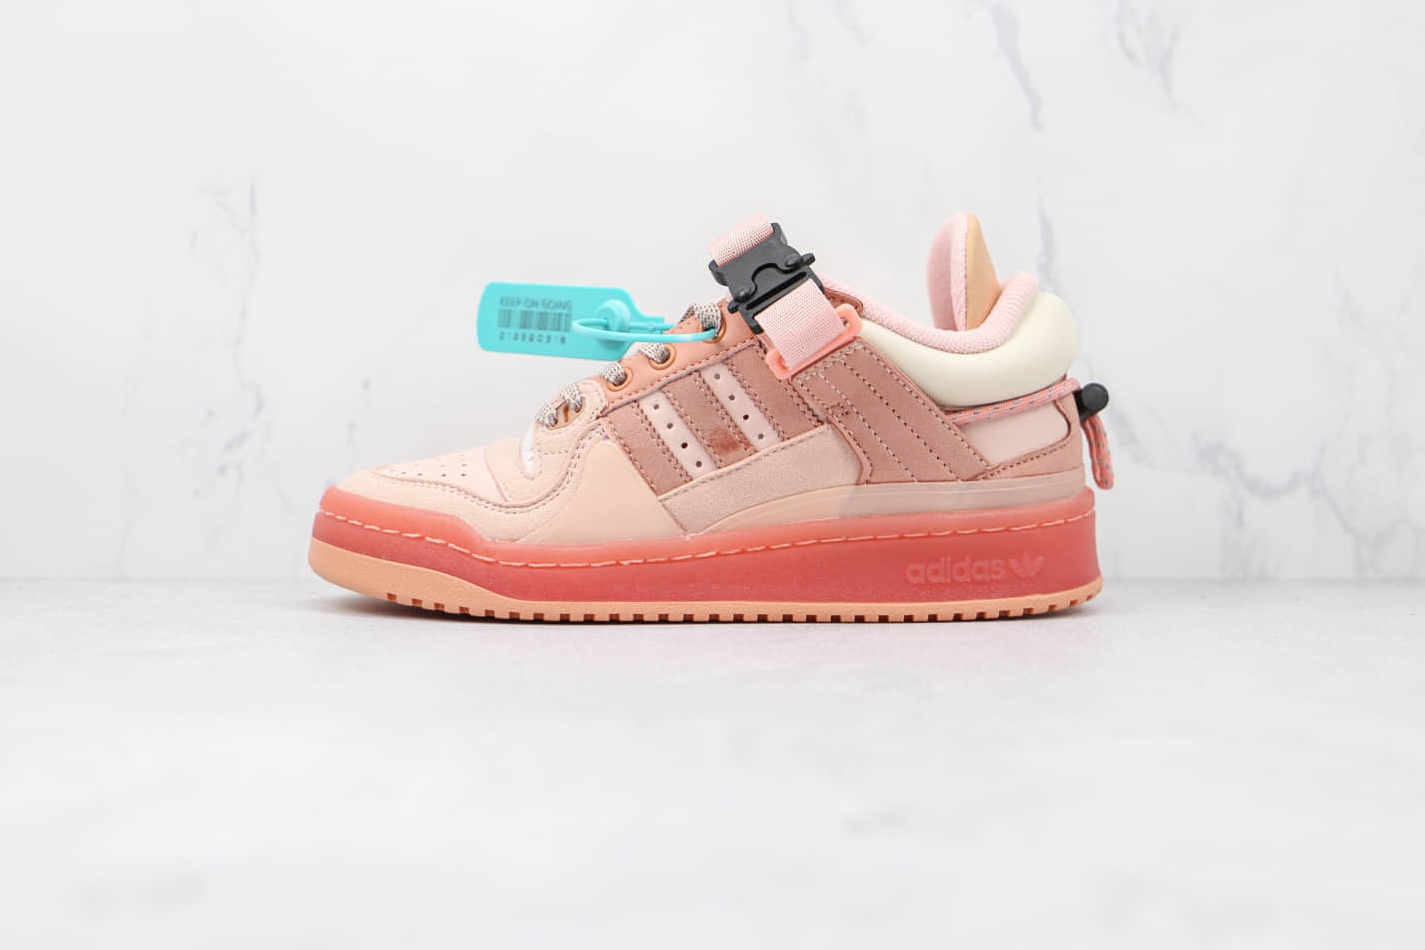 Adidas Bad Bunny x Forum Buckle Low 'Easter Egg': Limited Edition Collaboration Sneakers